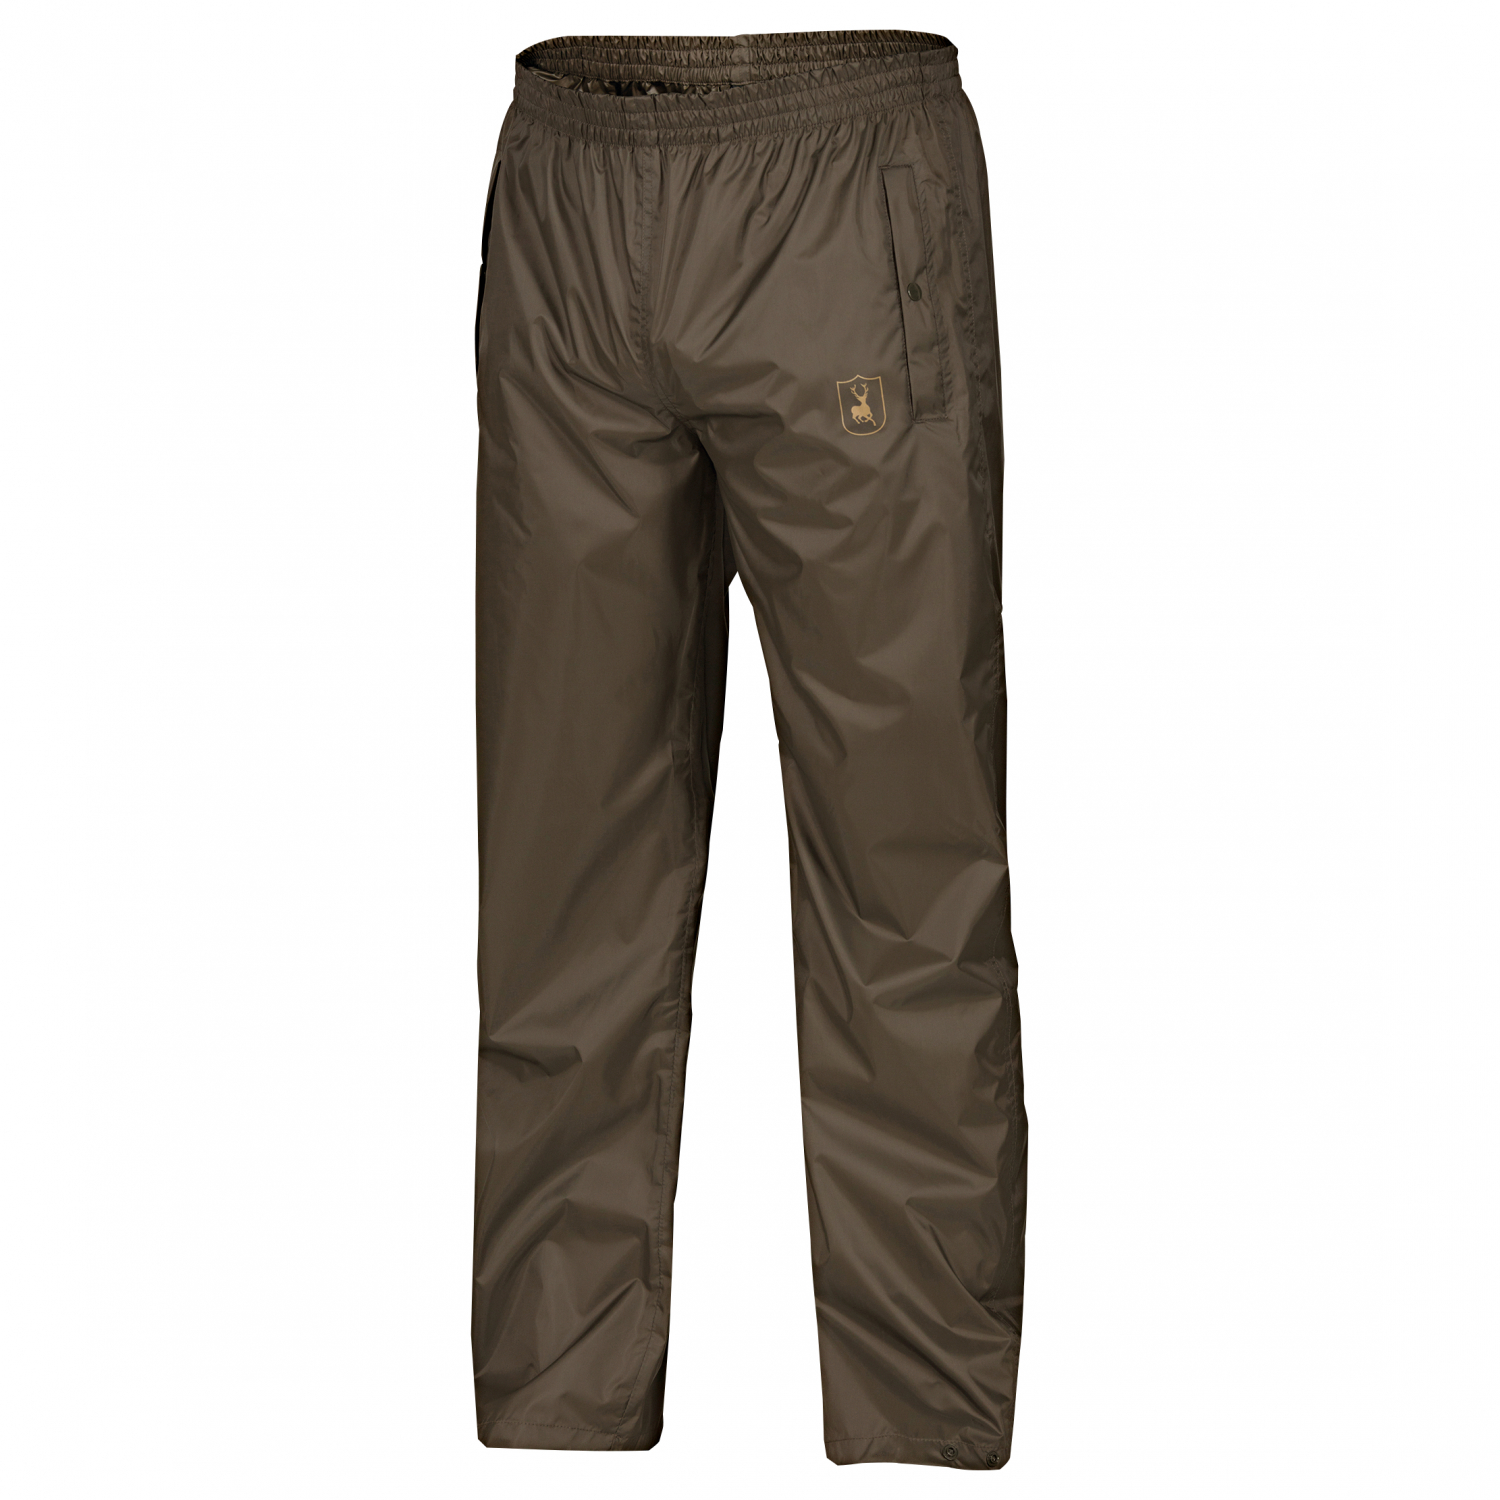 Bulkbuy ESDY 23colors Waterproof Windproof Quick Dry Hunting Softshell  Trousers price comparison